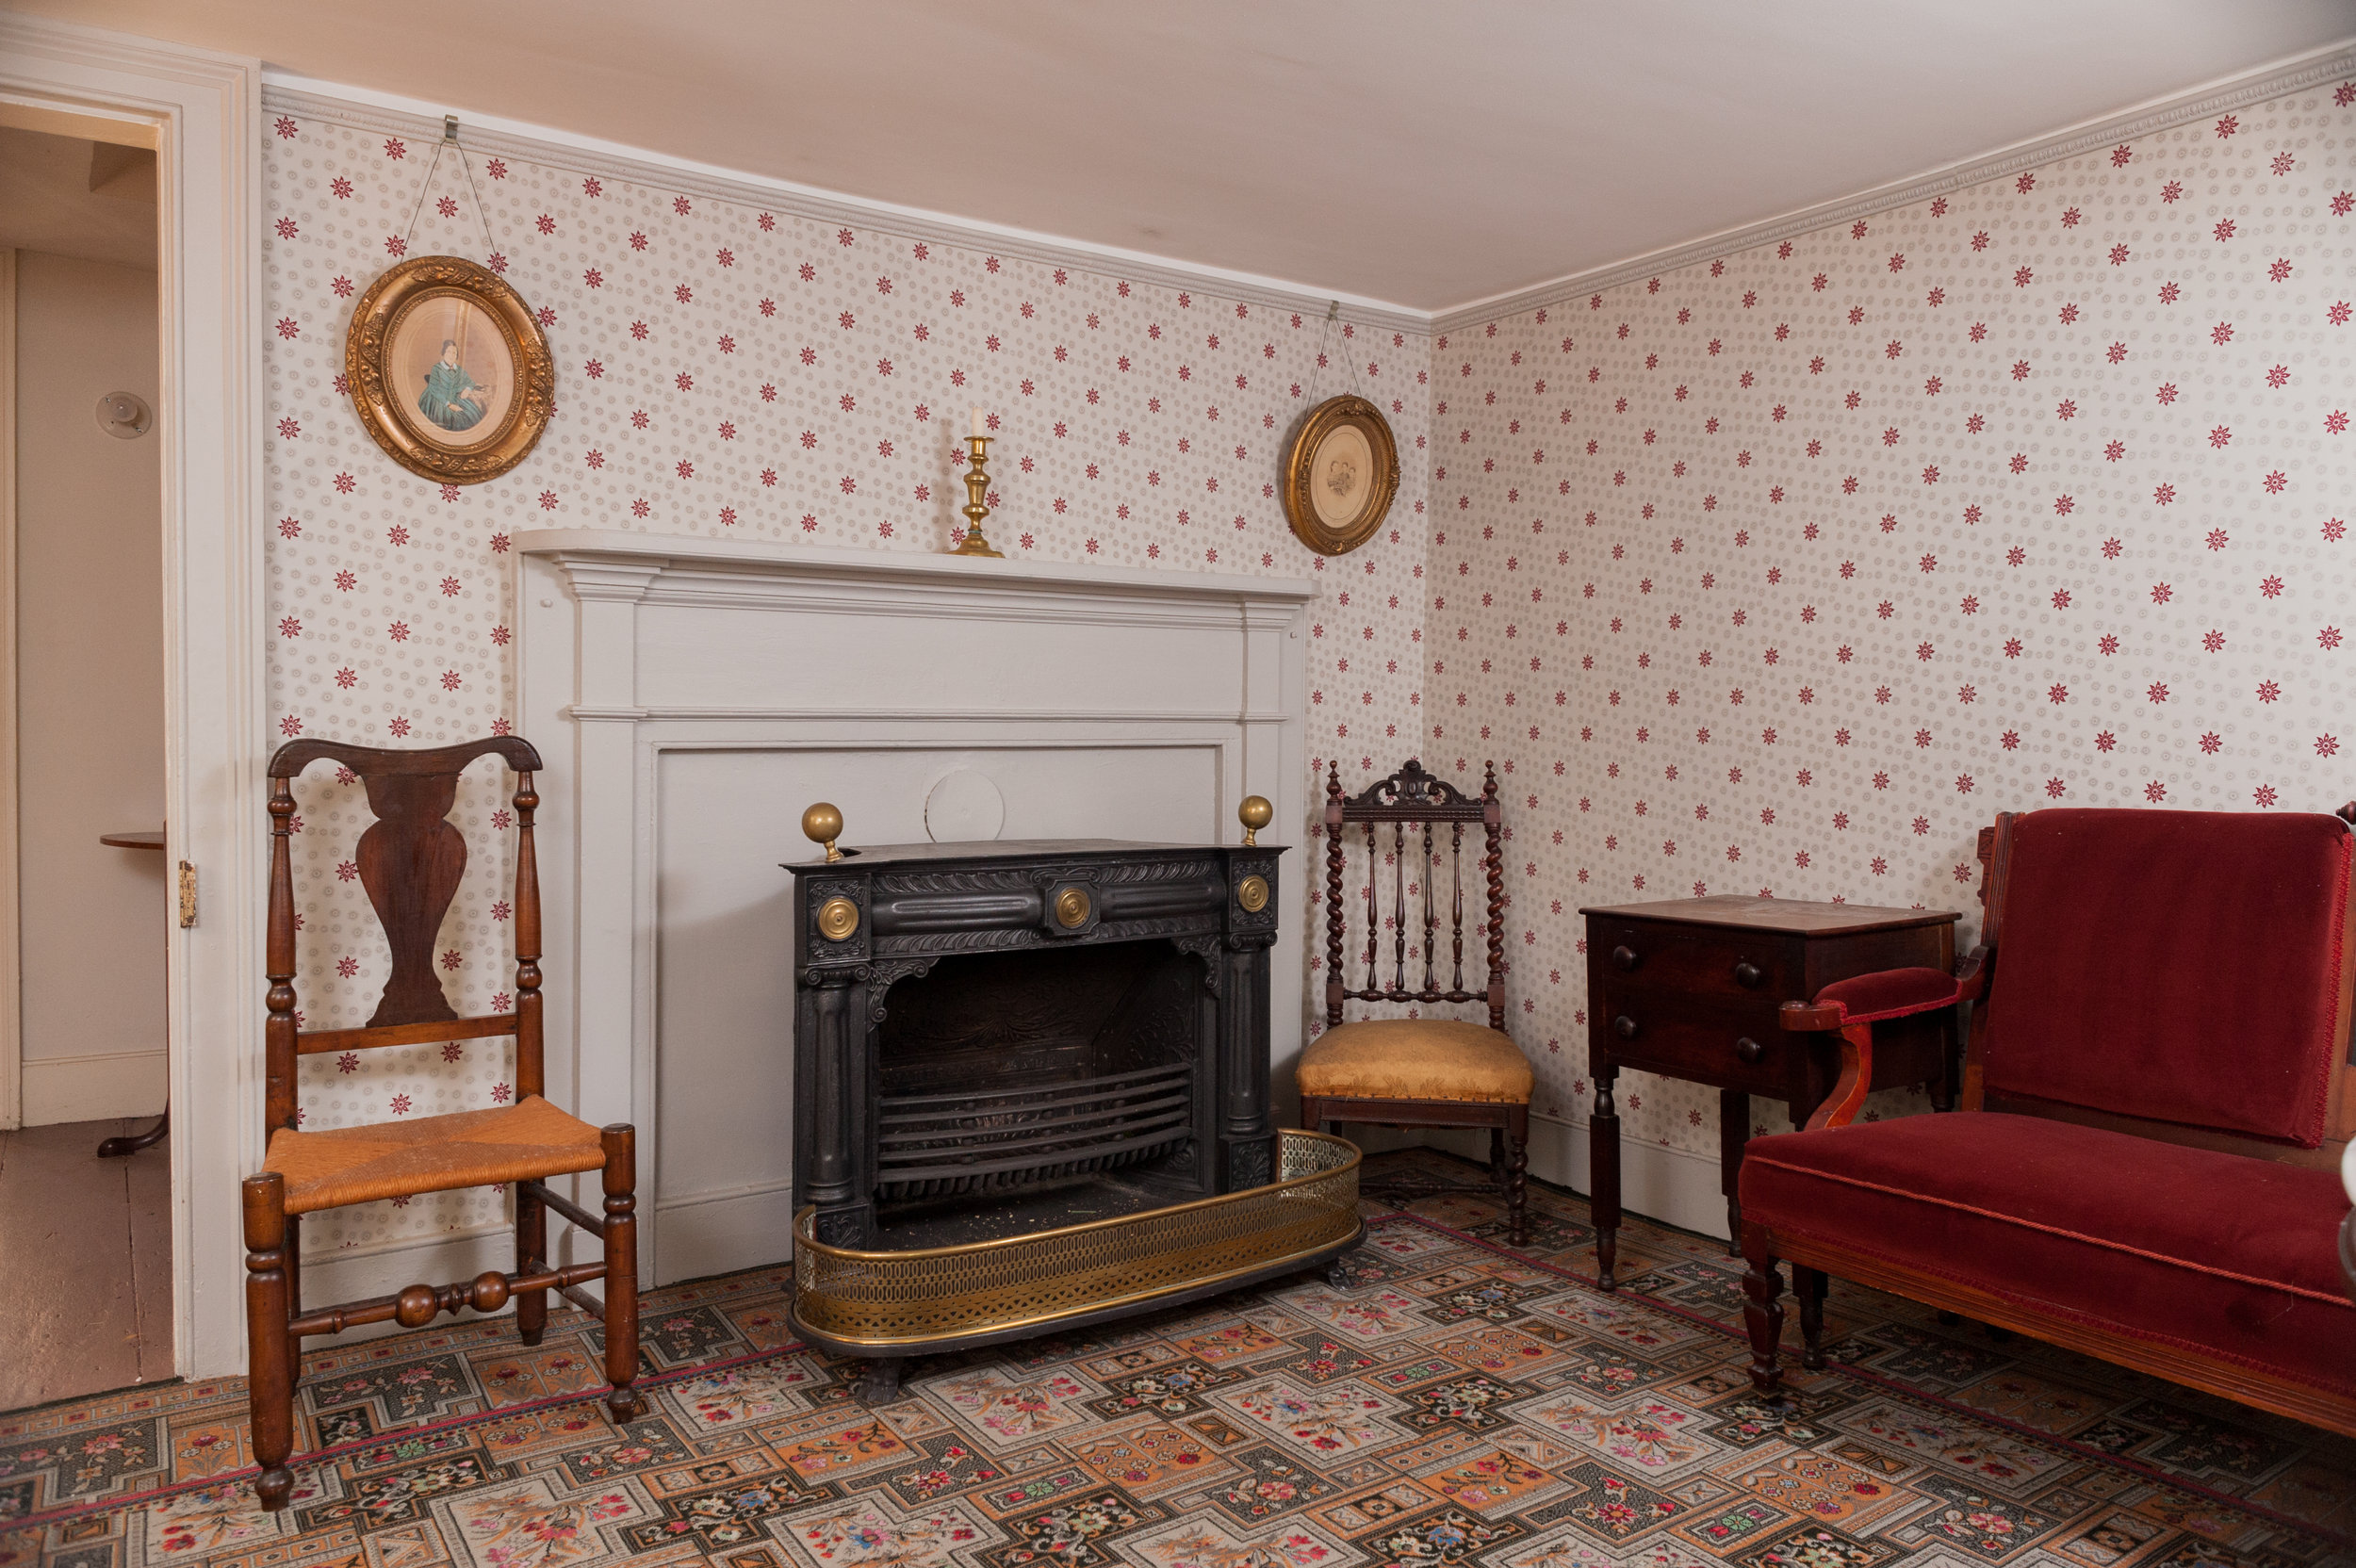 A Franklin stove kept the parlor warm. It is one of several in the house. (Copy)